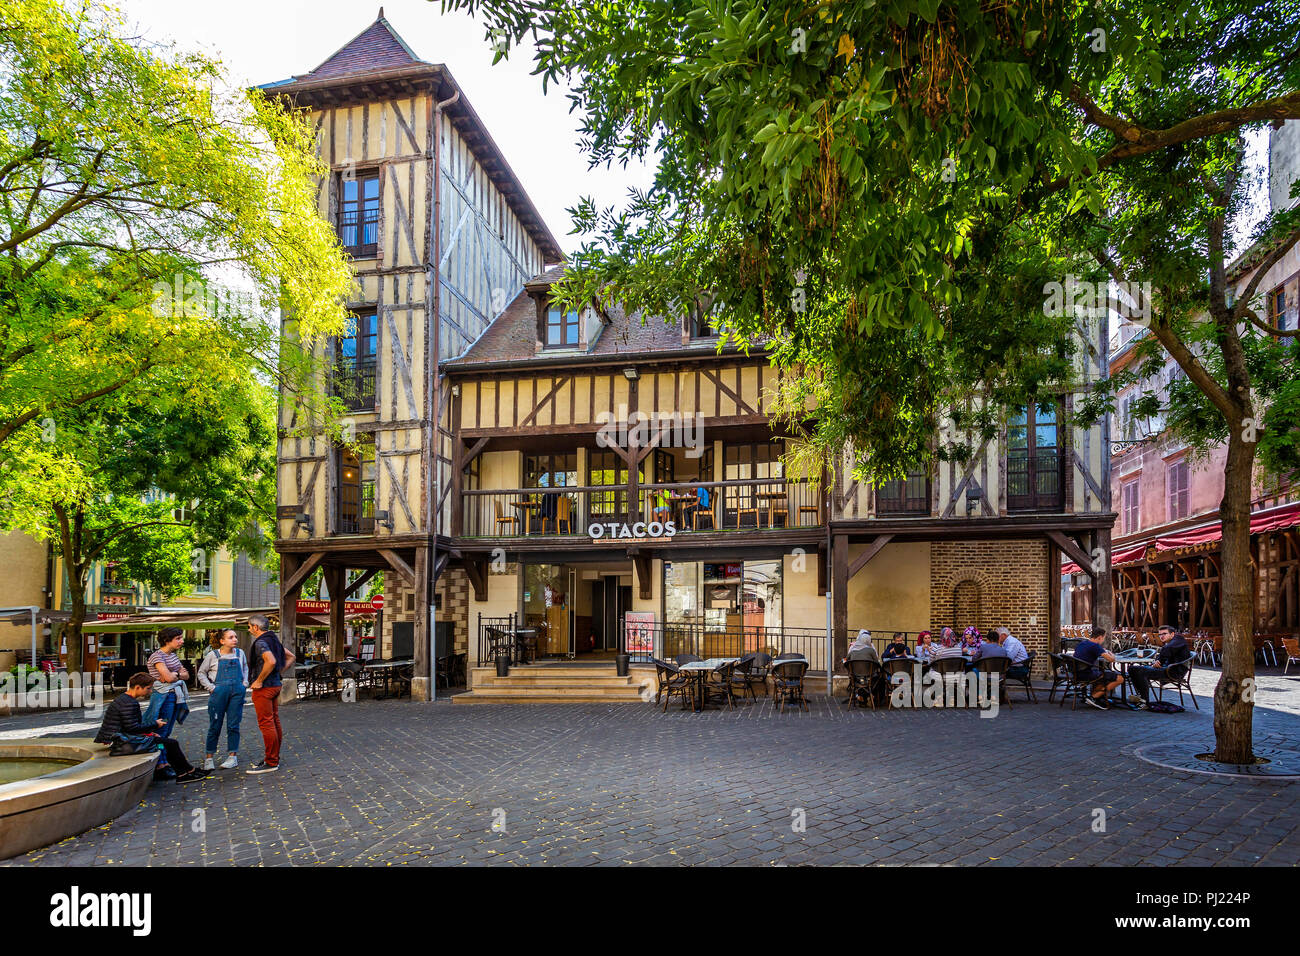 Half timbered building in historic centre of Troyes, Aube, France on 31 August 2018 Stock Photo